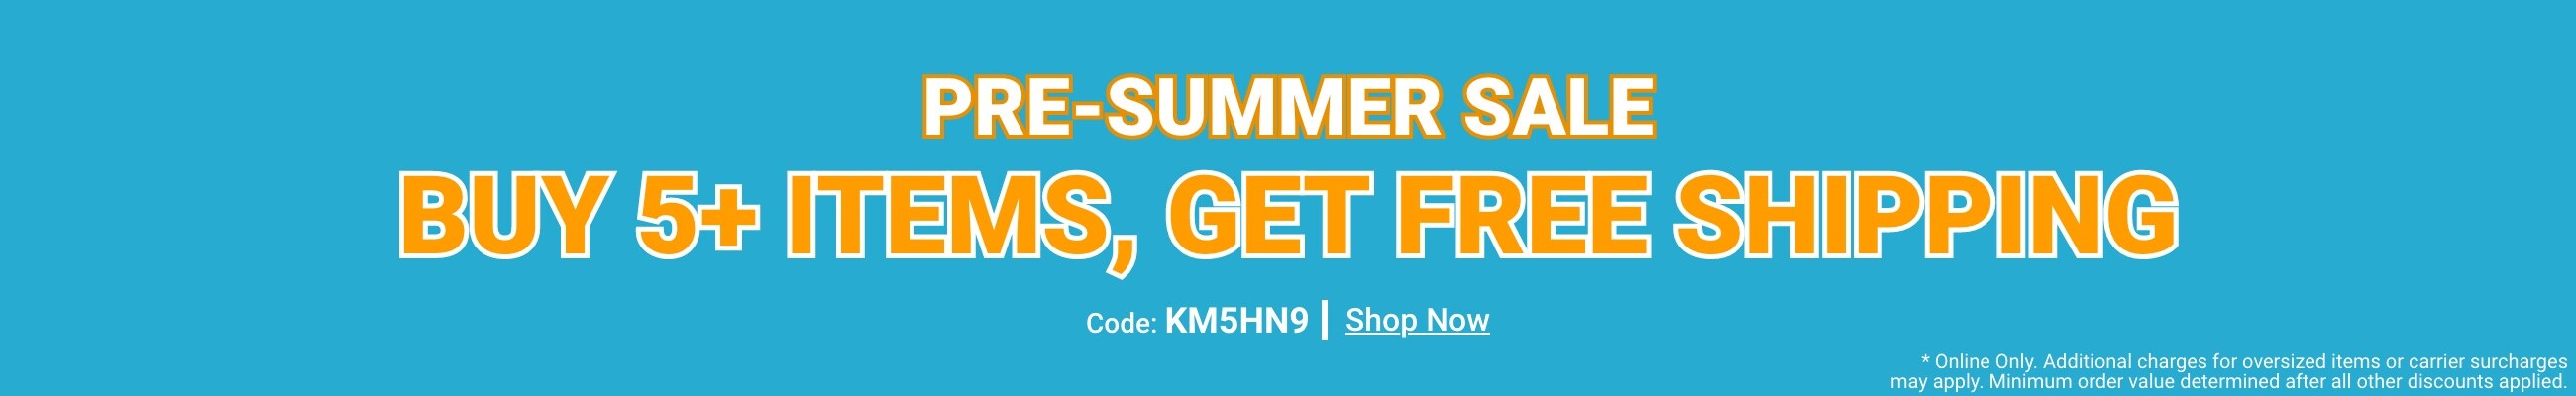 Buy 3 items, get free shipping. - Shop Now